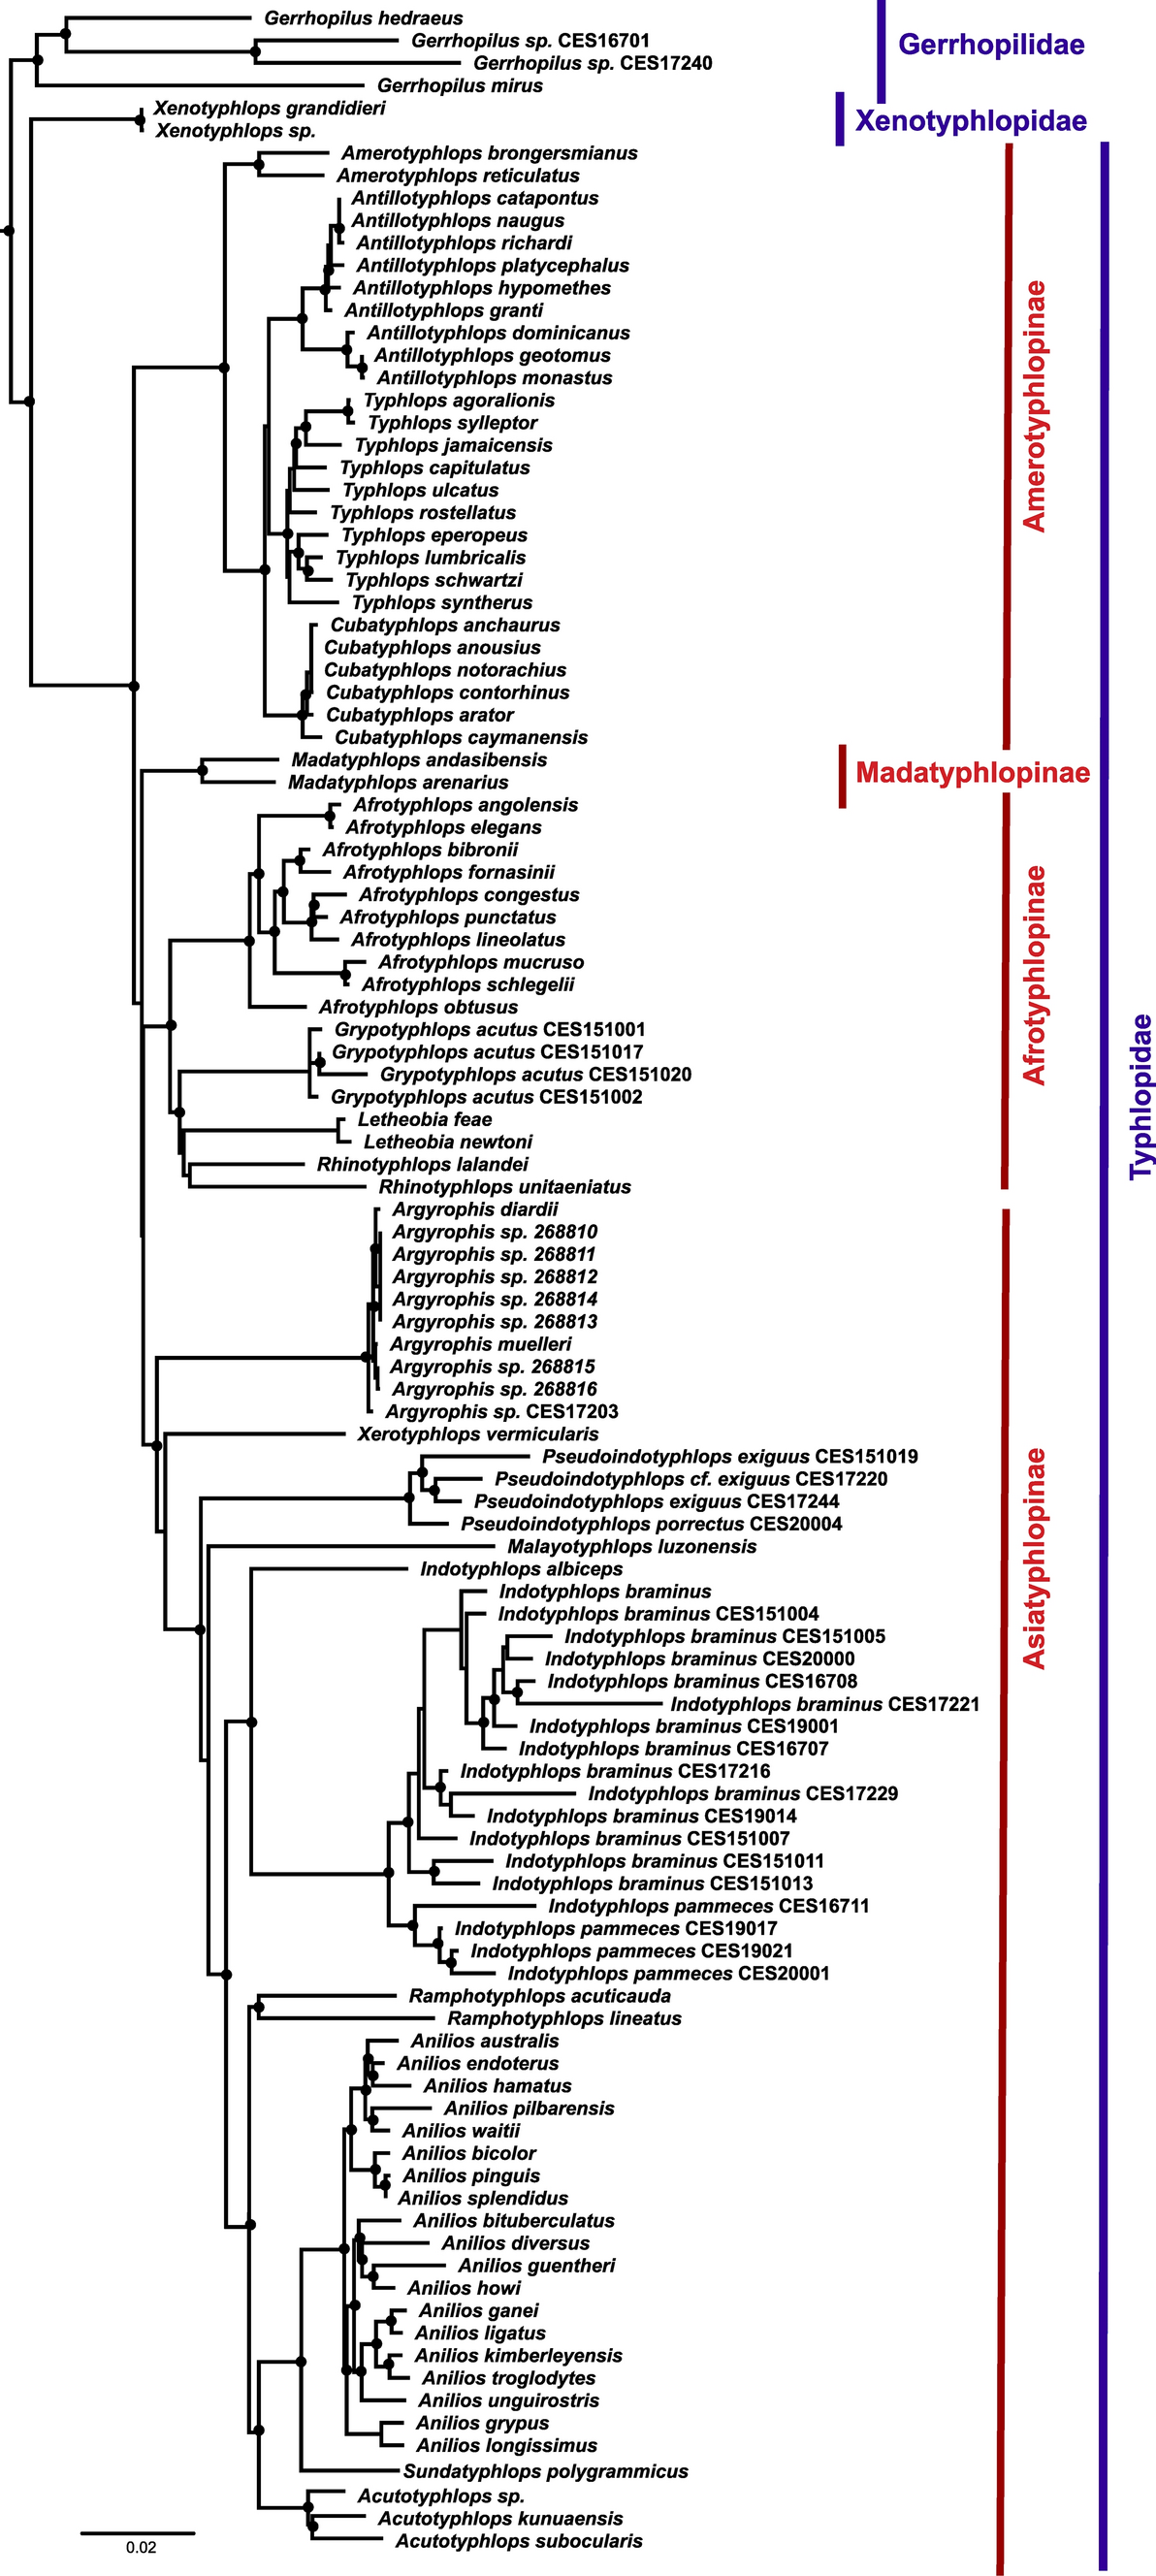 Molecular data reveals a new genus of blindsnakes within Asiatyphlopinae from India